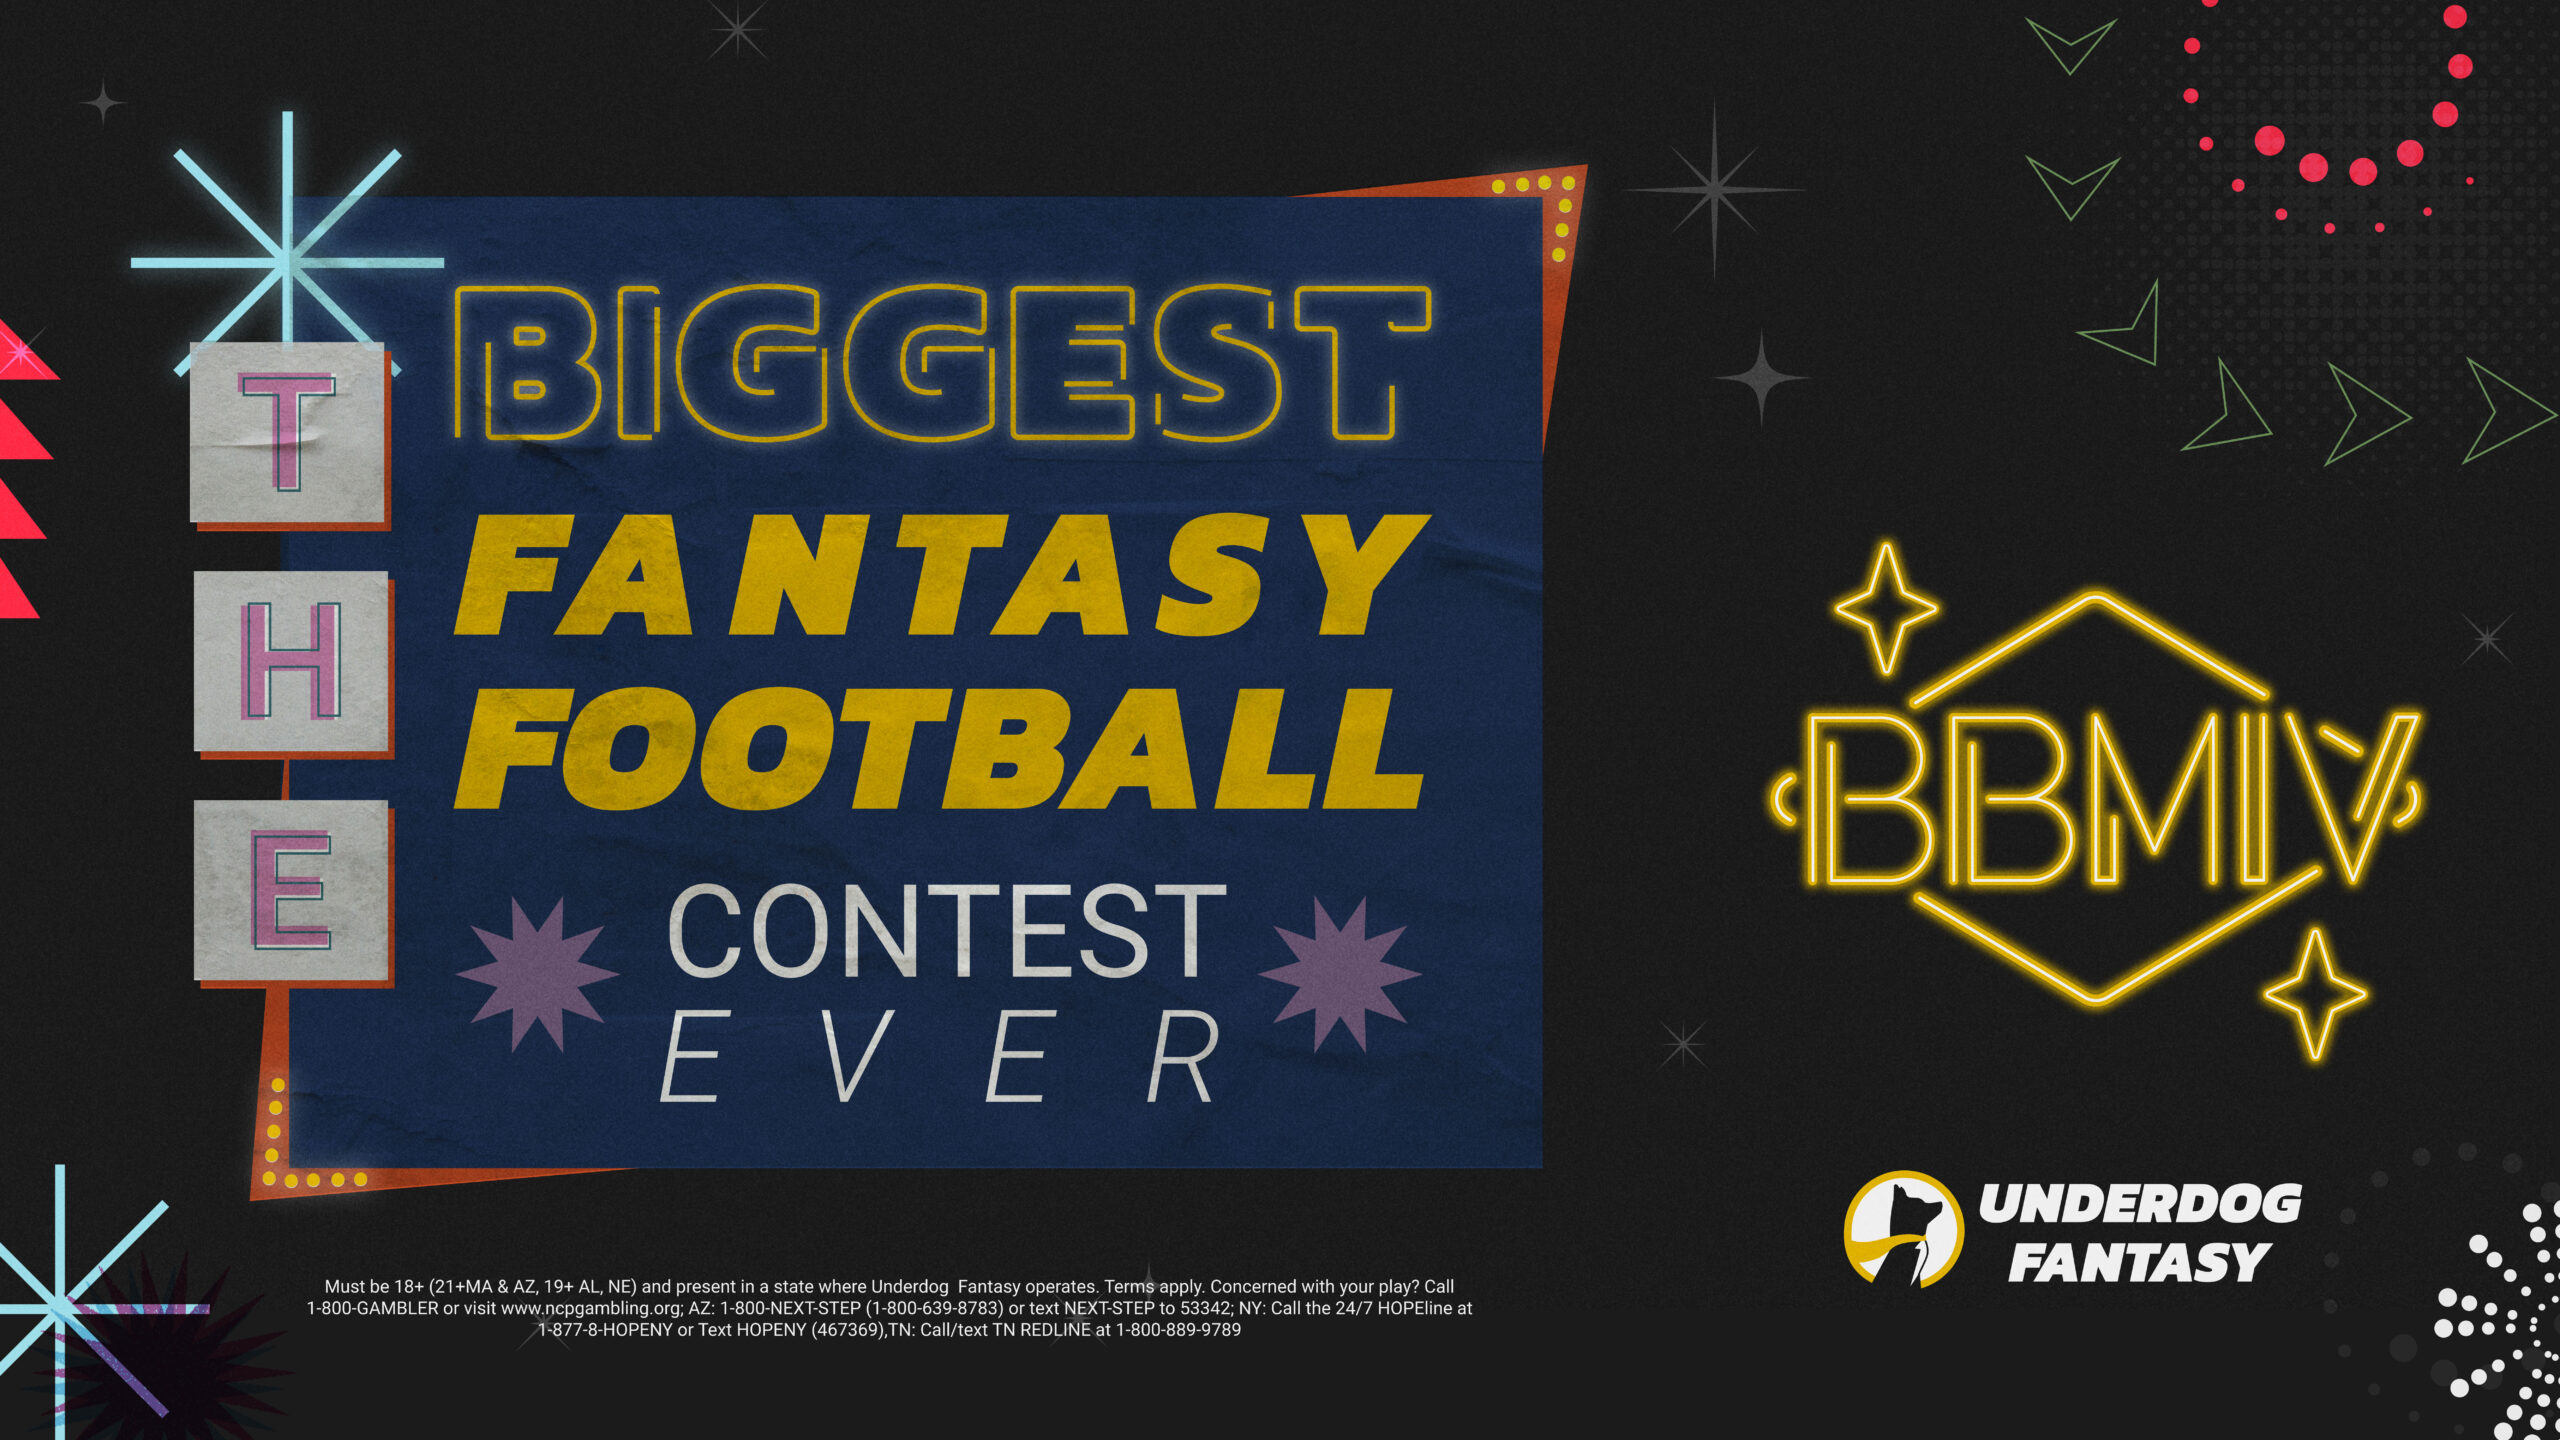 Underdog Fantasy's Best Ball Mania IV is one of the most popular best ball tournaments as we answer the question: What is best ball fantasy football?